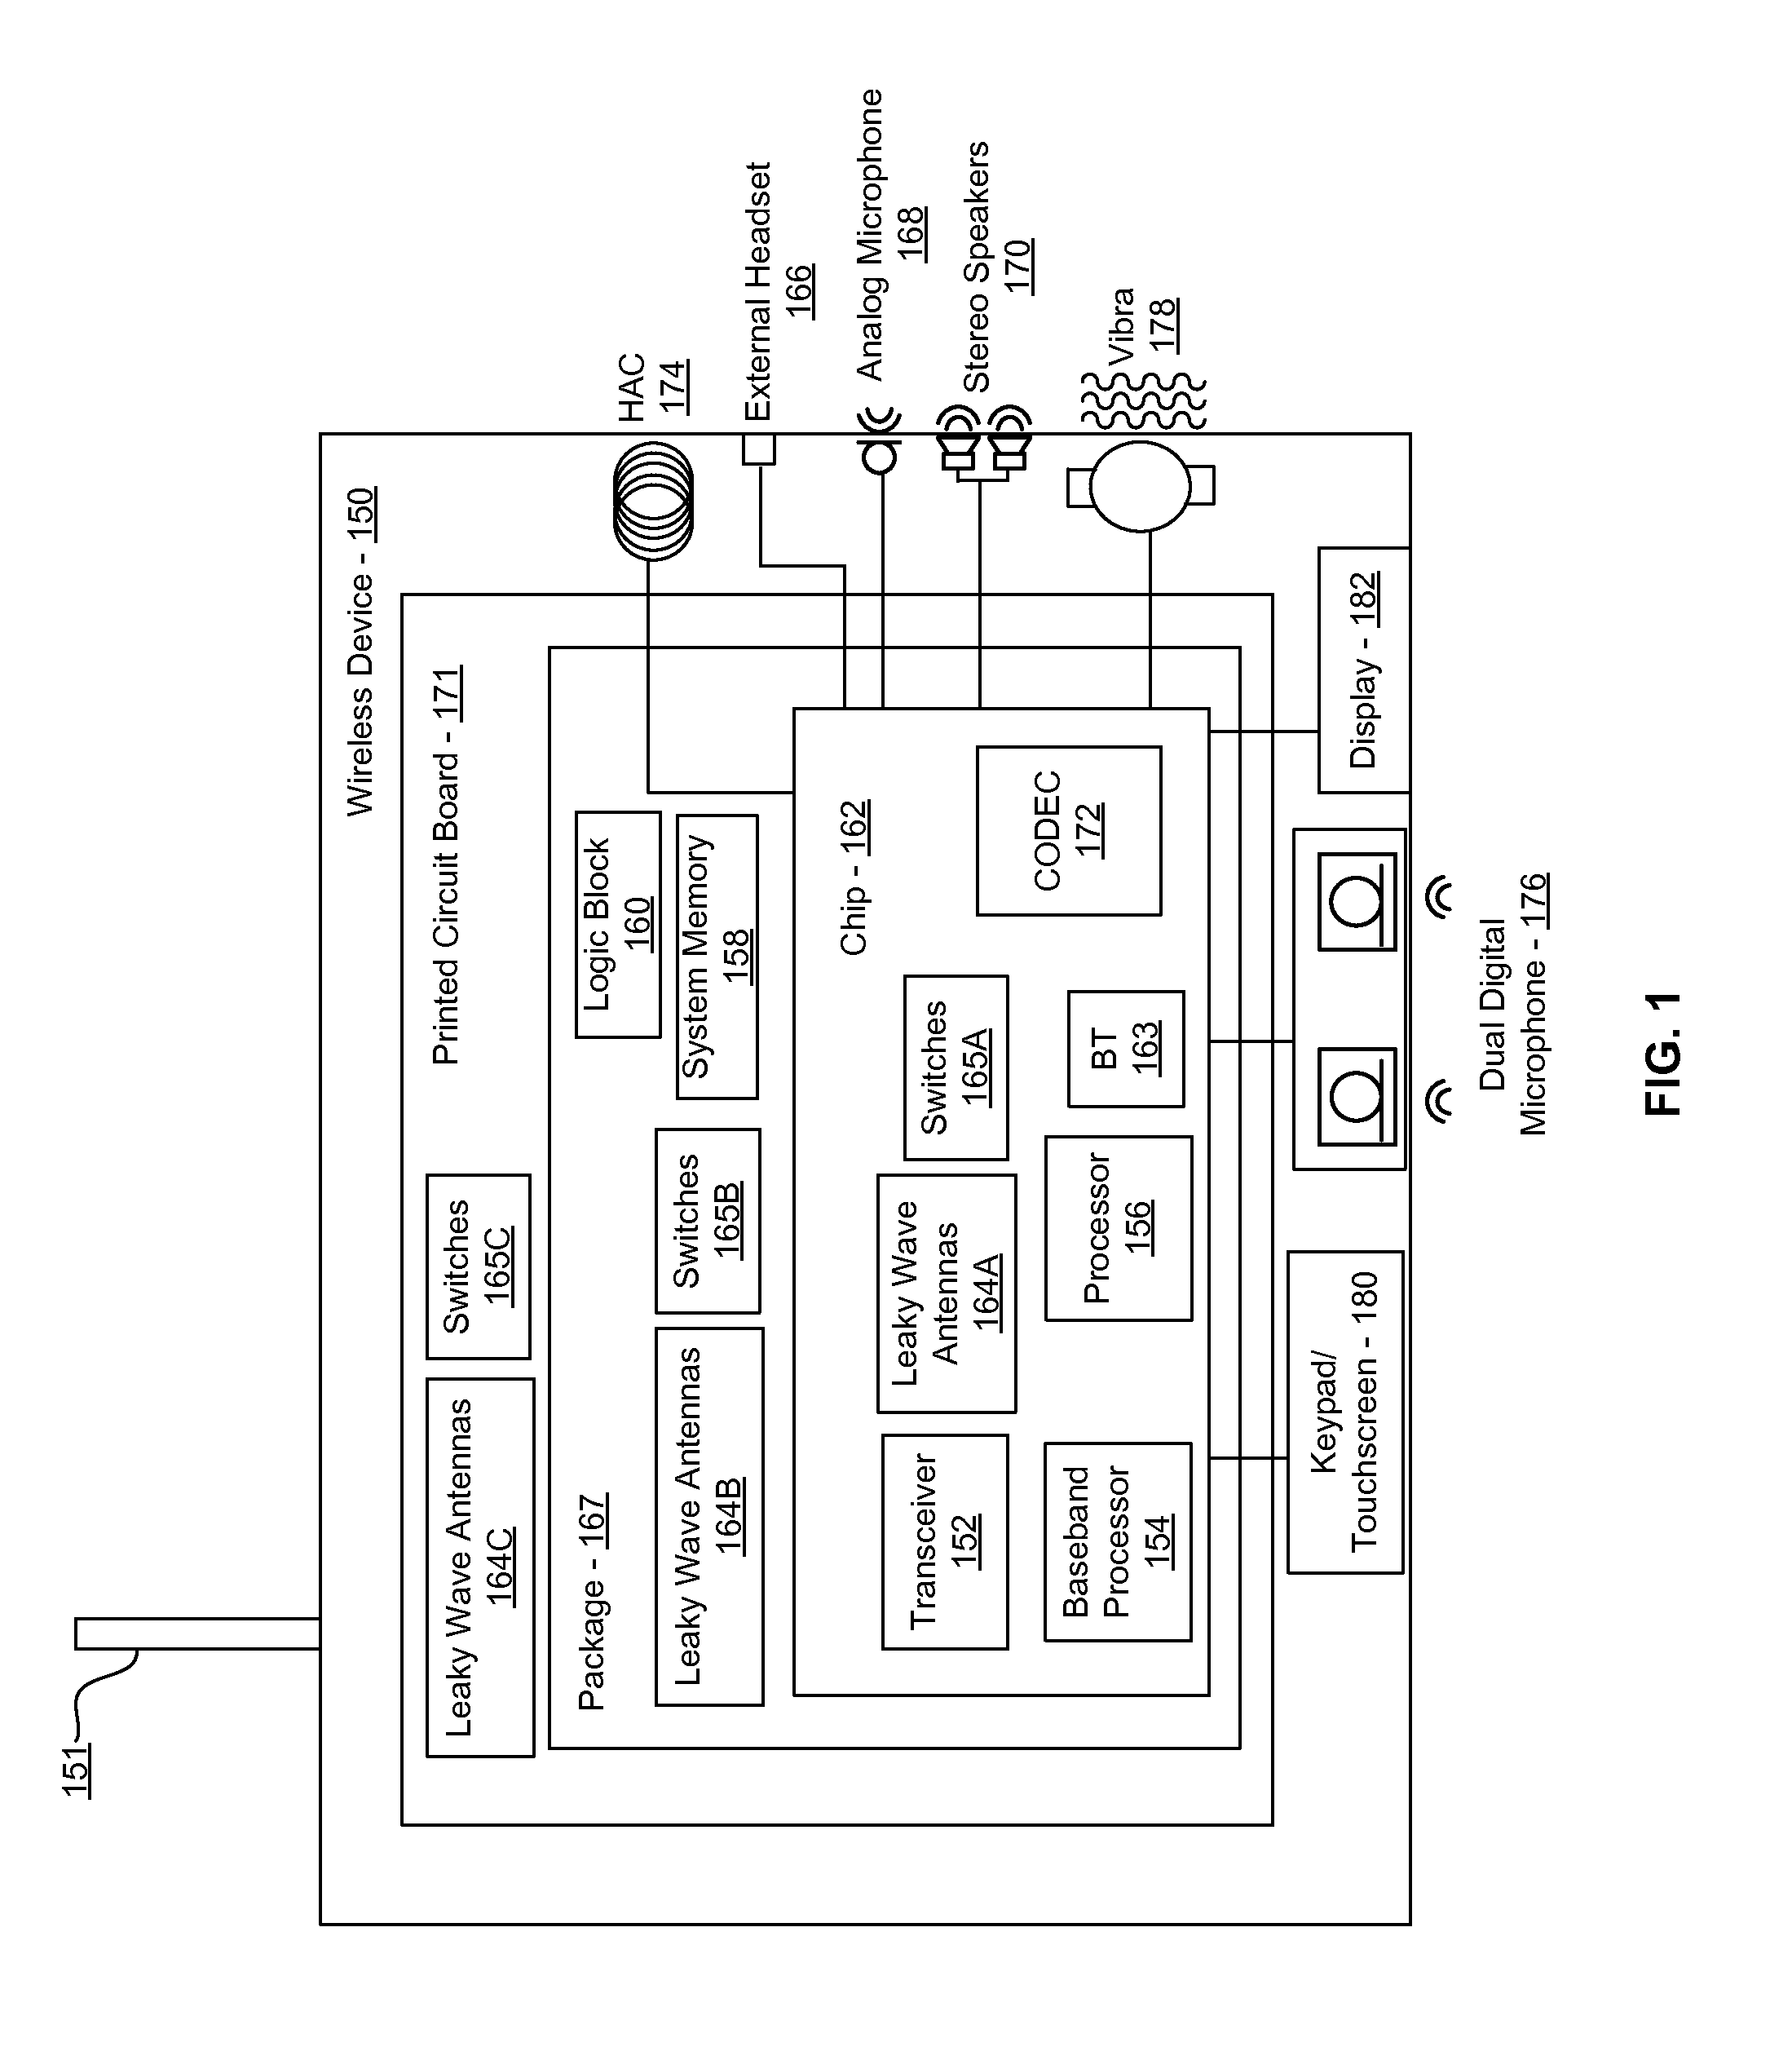 Method and system for a distributed leaky wave antenna